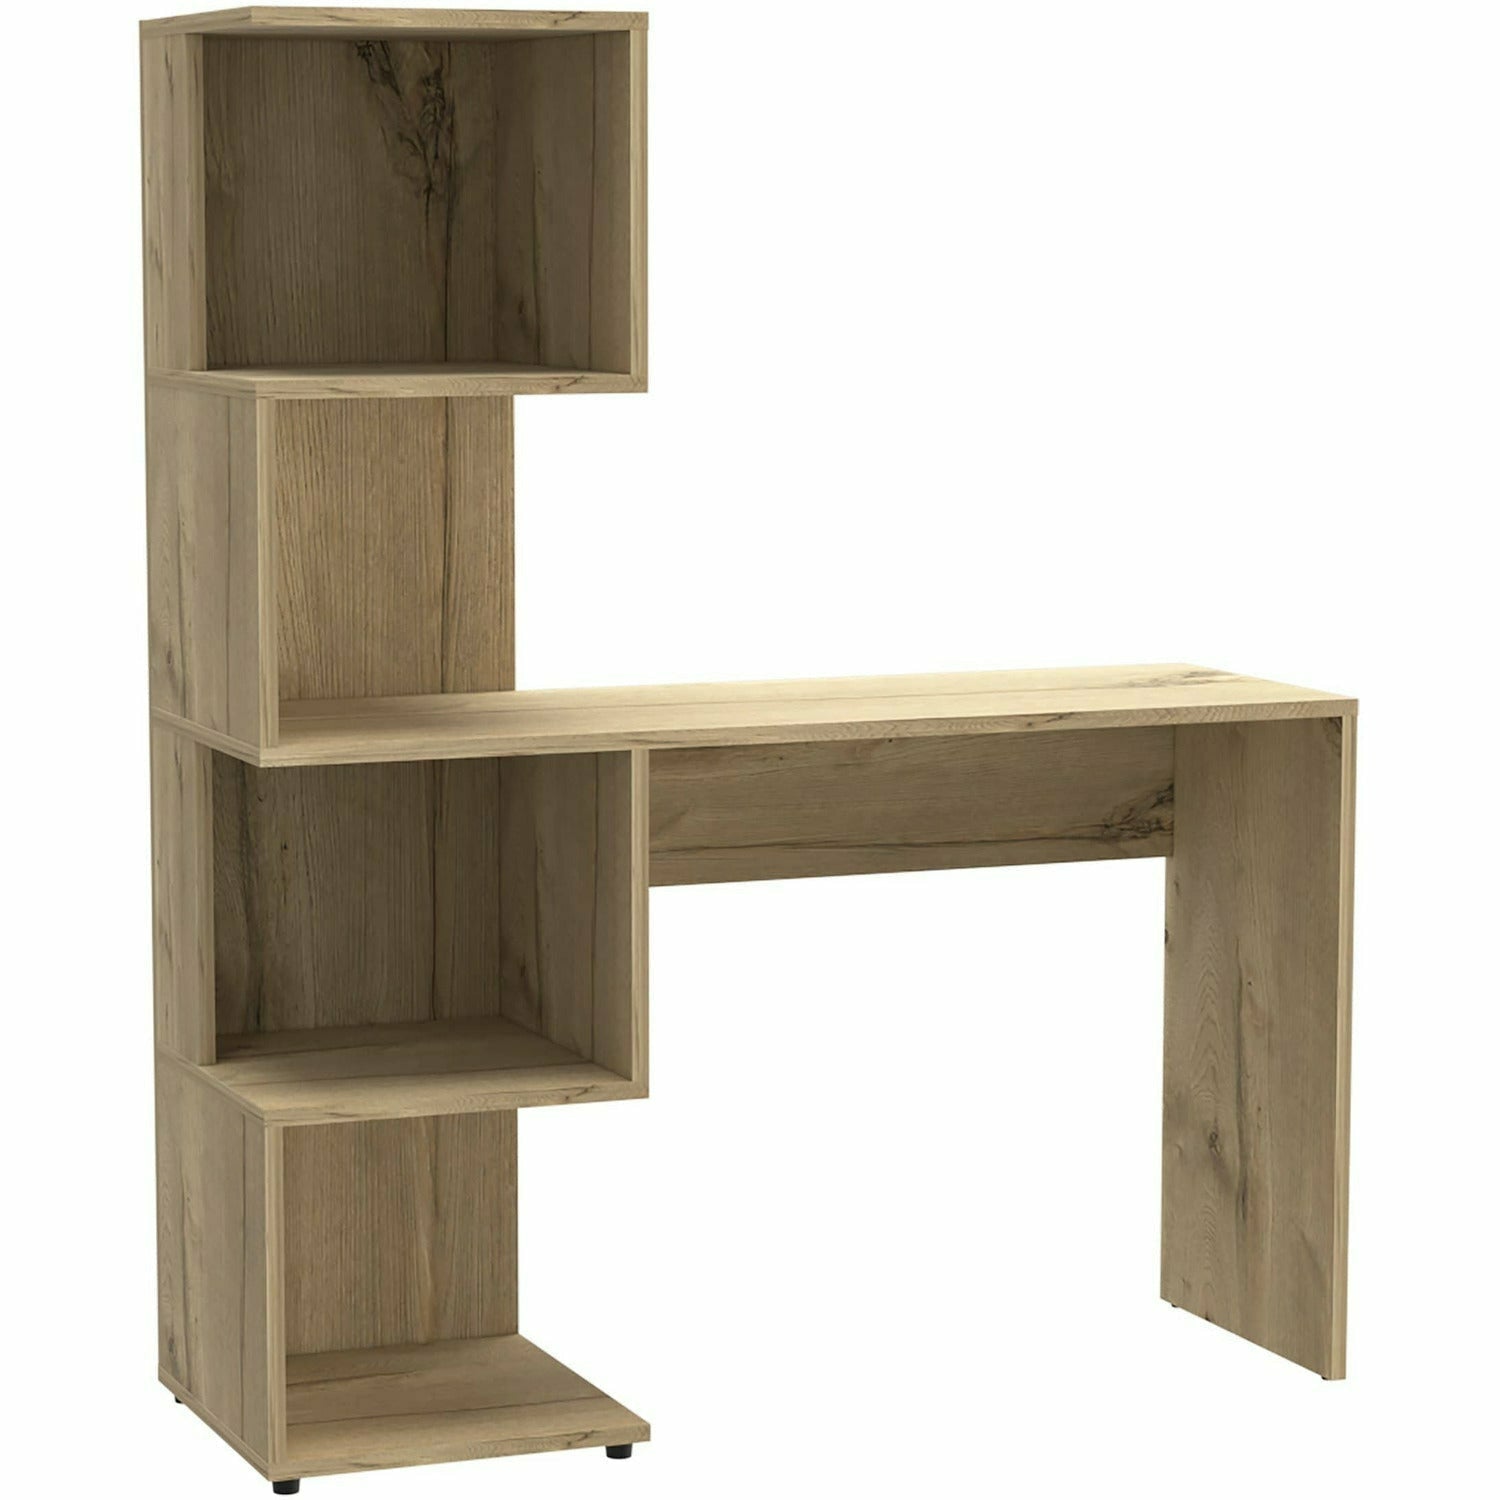 Brooklyn Desk With Tall Shelving Unit Right Side